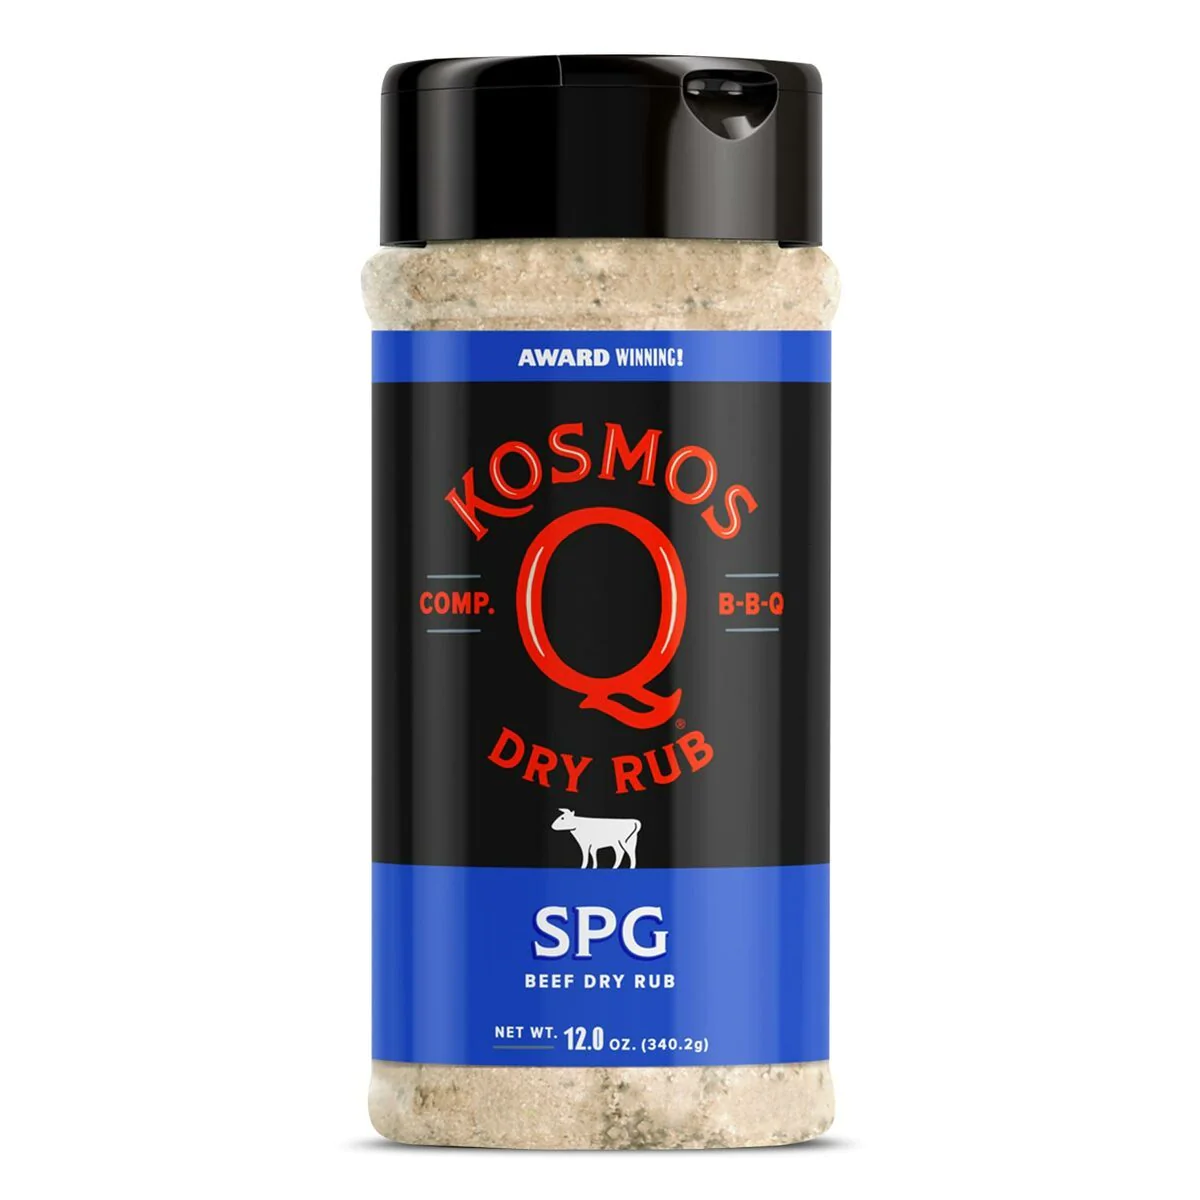 /assets/images/products/product-images/ZPYZE5E8PBZ8M/6620034d93734_kosmo-s-q-barbecue-rubs-shaker-bottle-spg-rub-30163402621087_5000x.webp